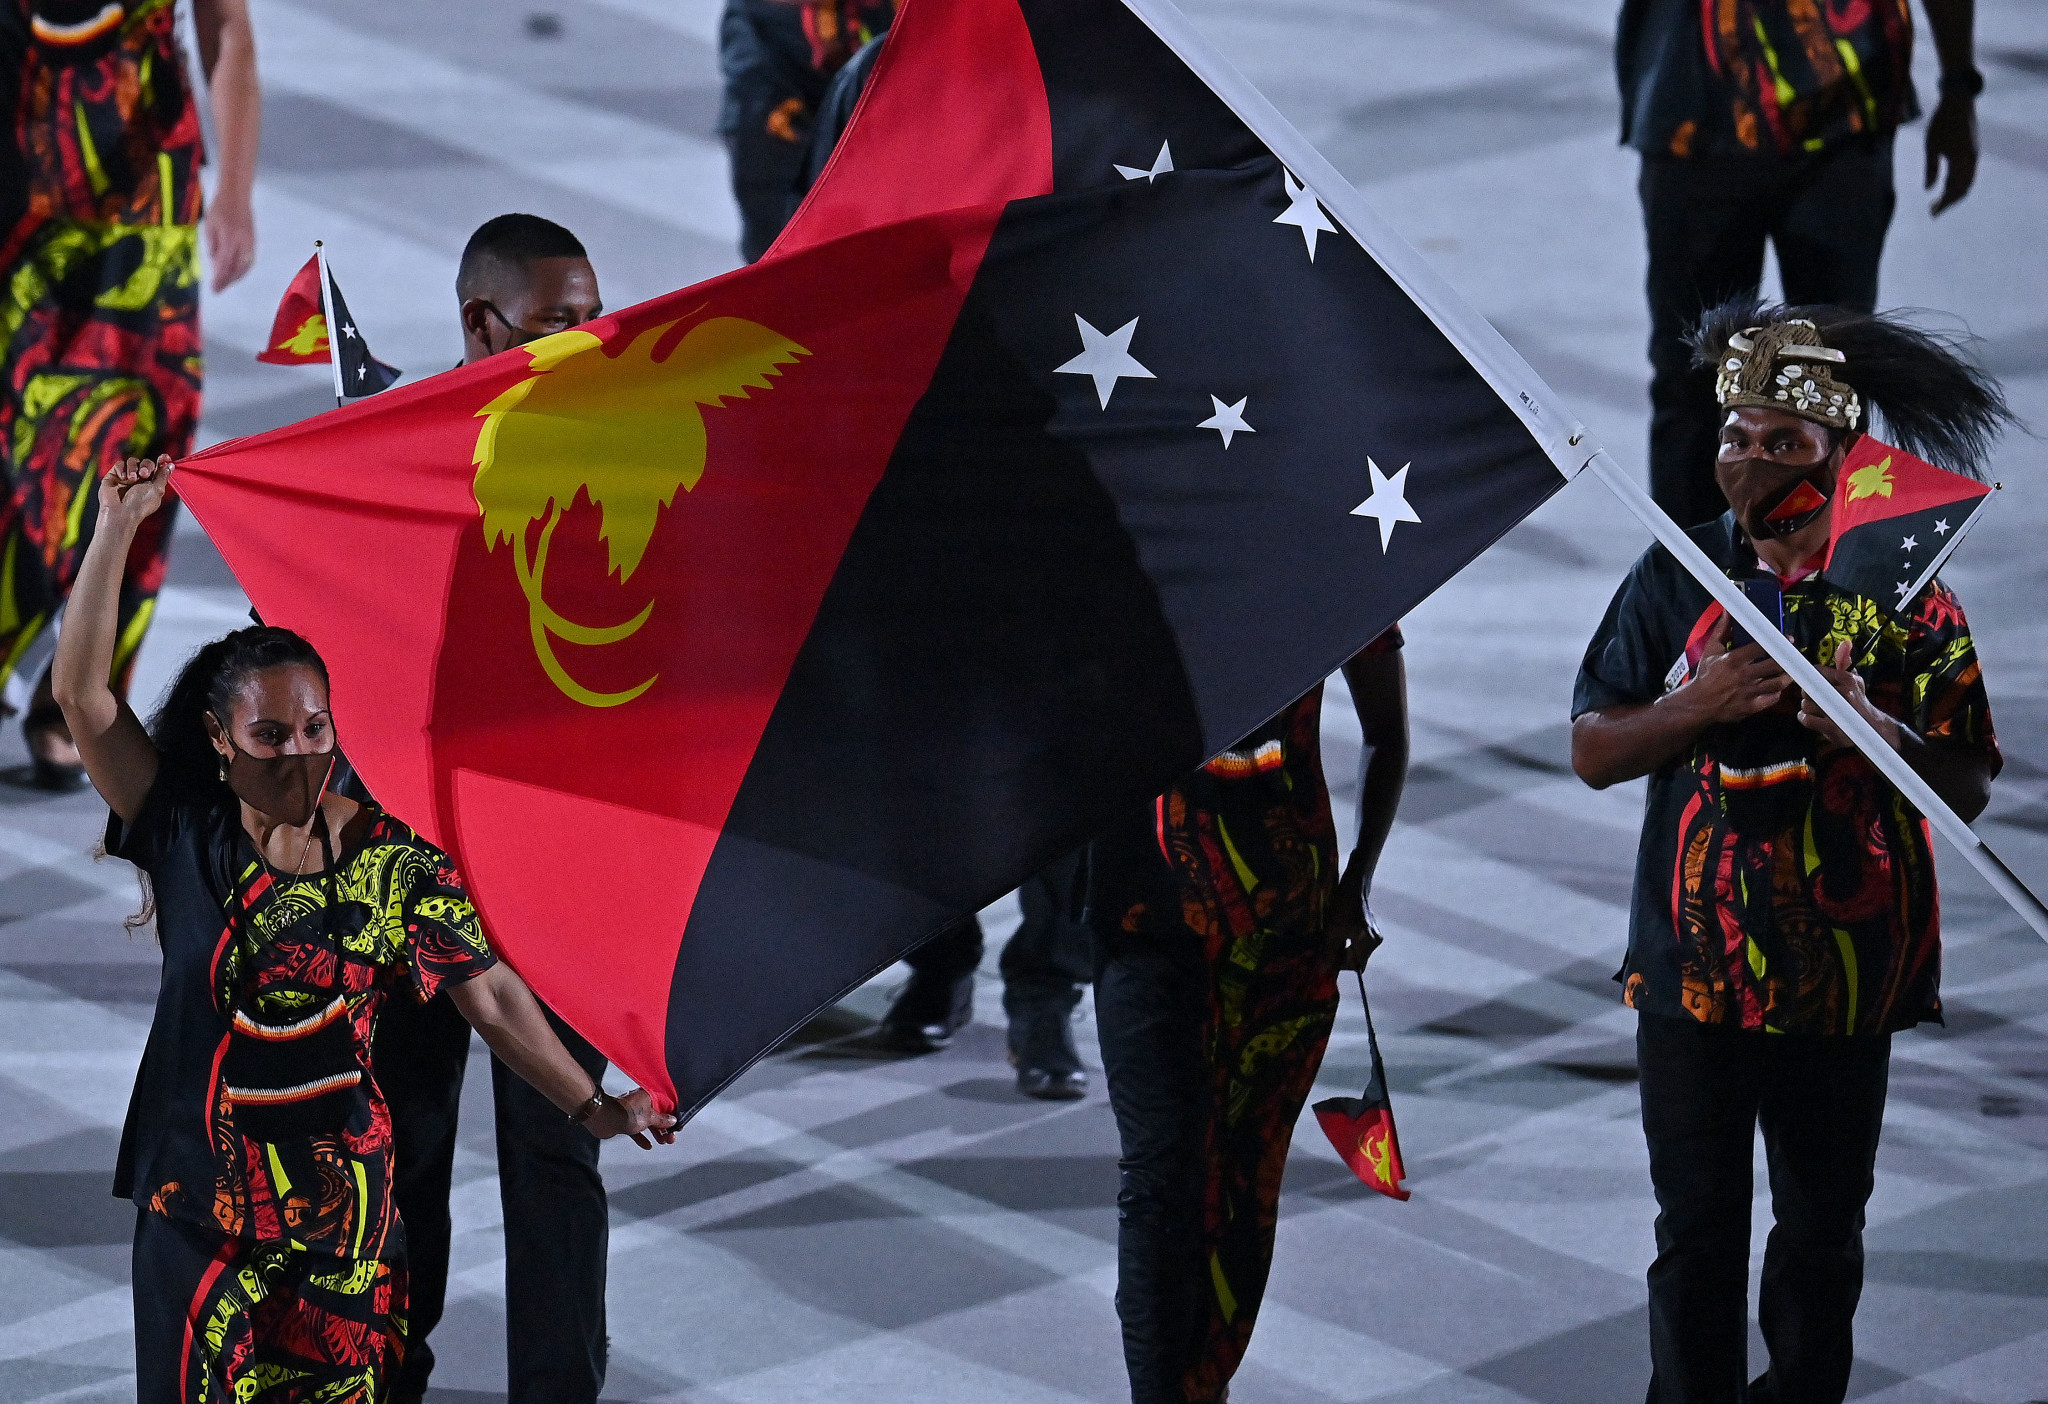 A major PNG Sports Foundation donation will help fund the Papua New Guinea Olympic Committee's trip to Birmingham ©Getty Images